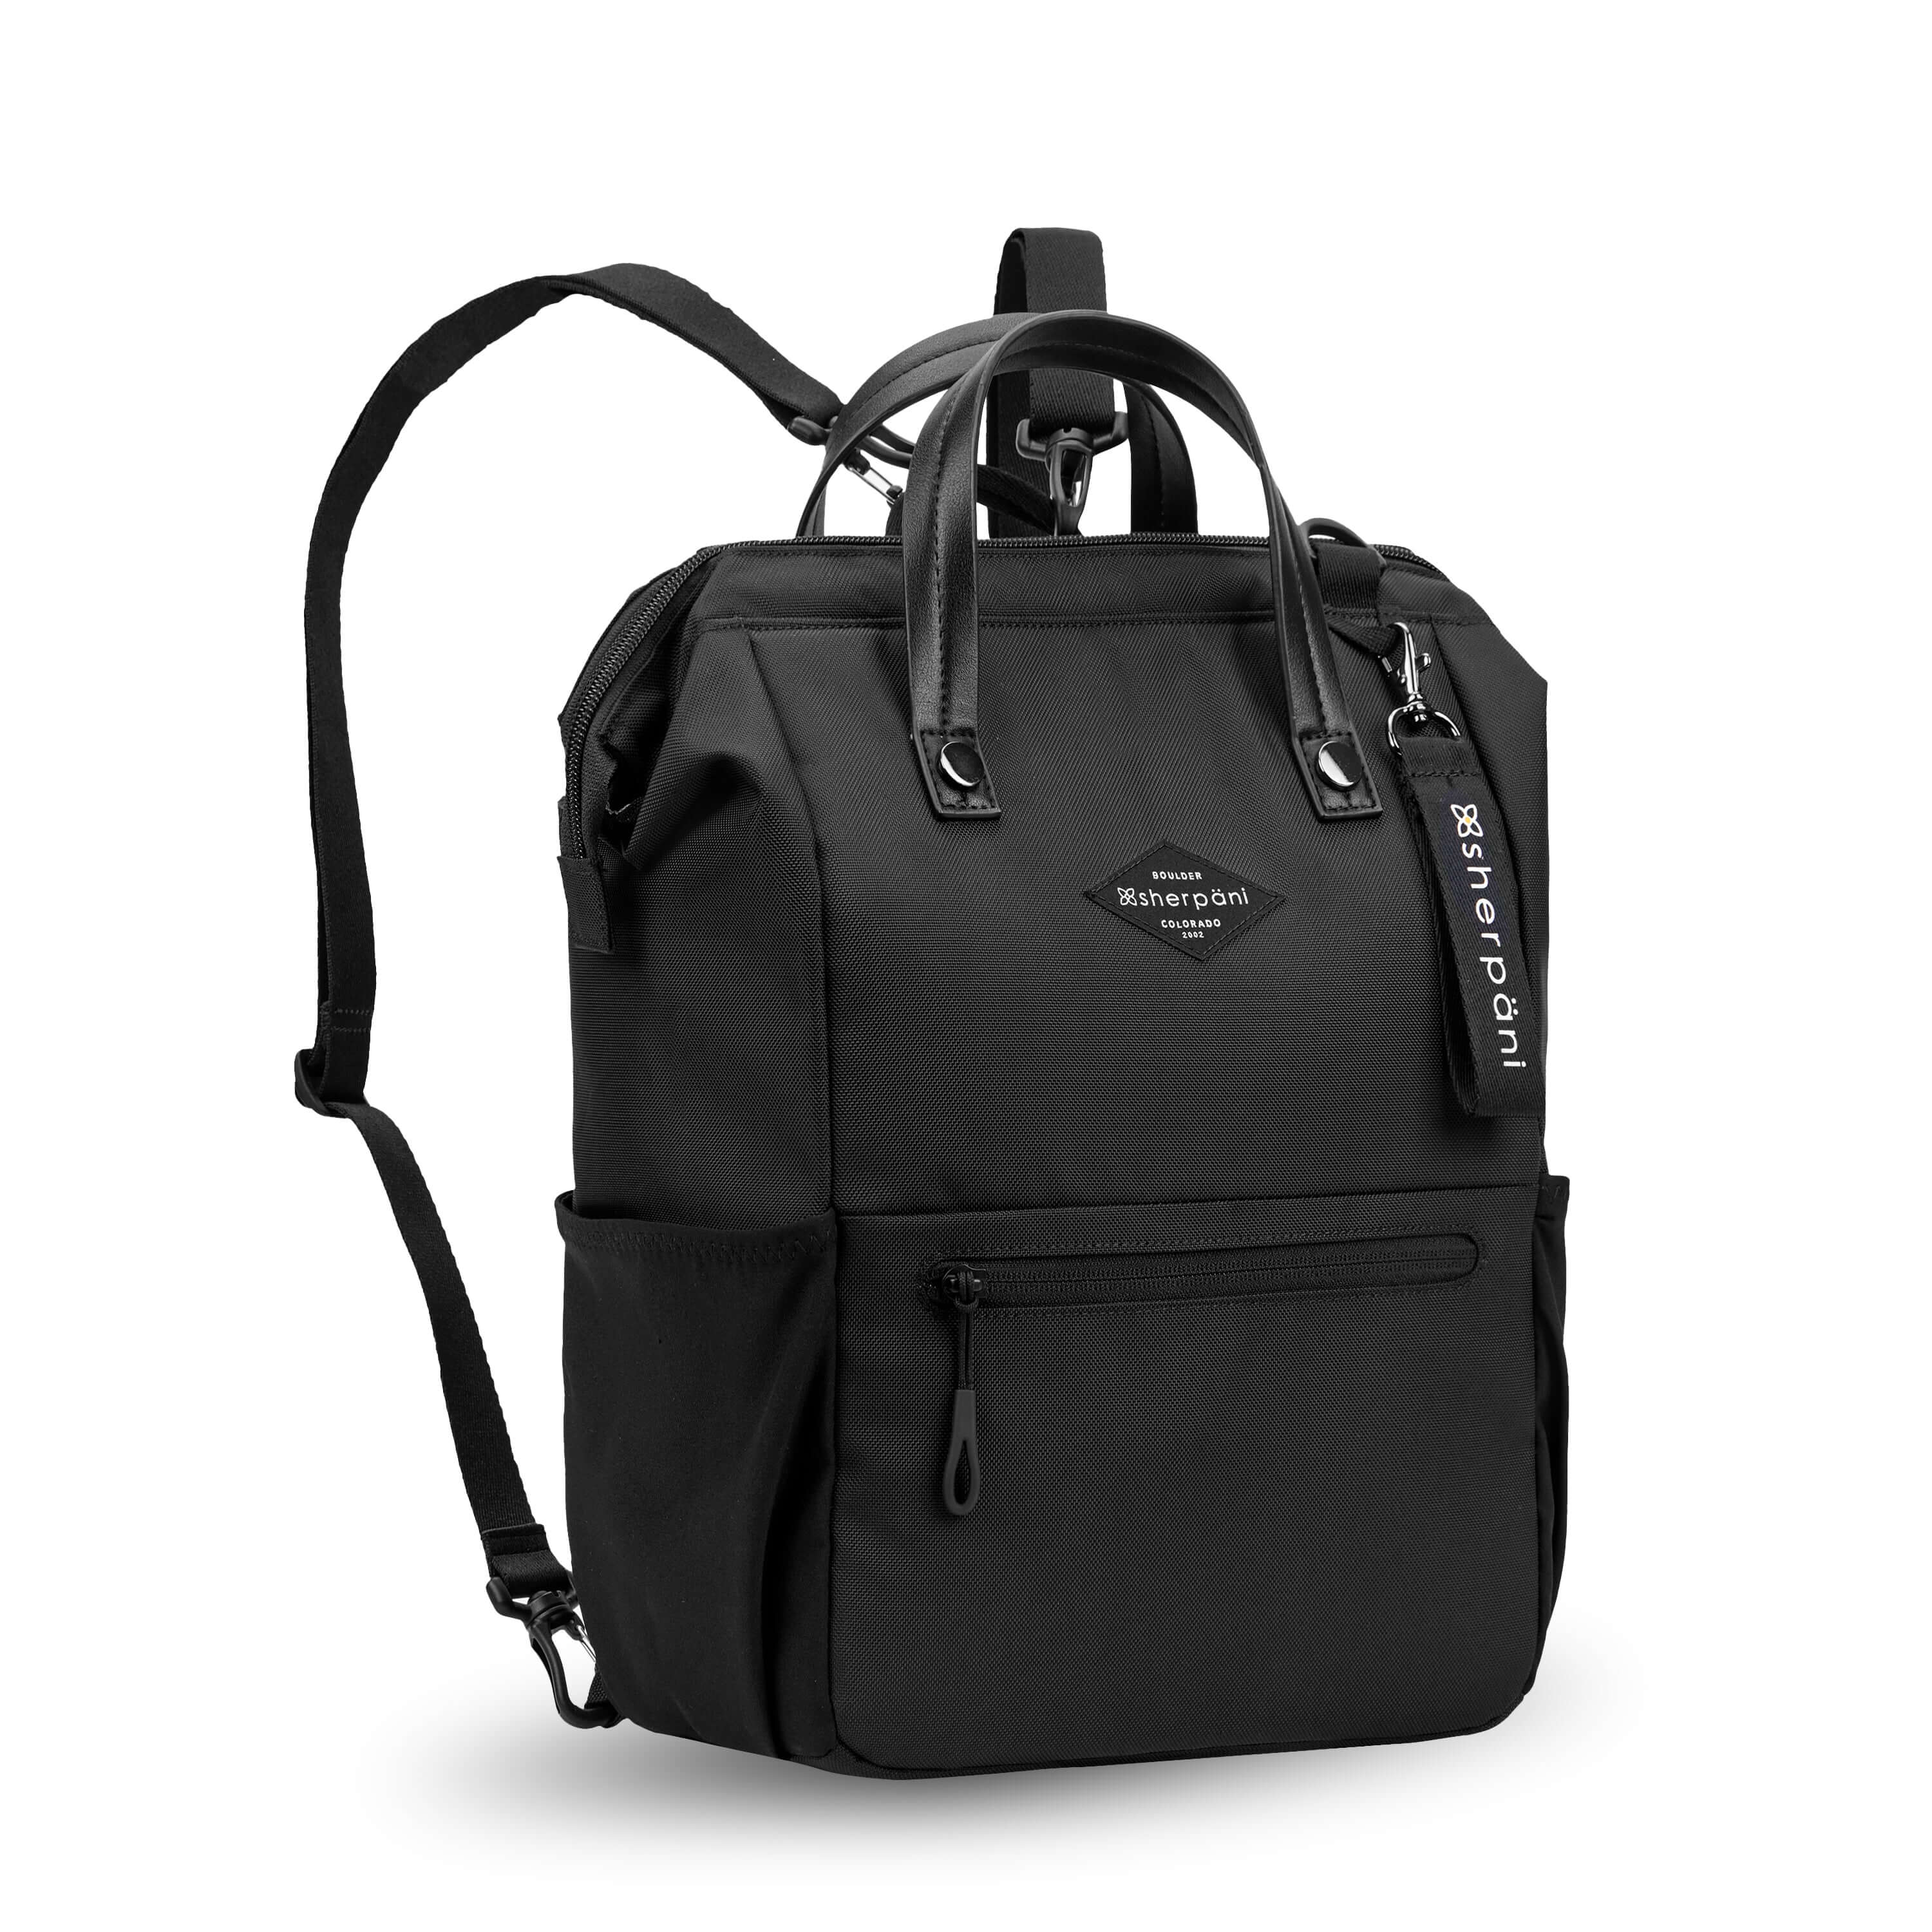 Shop AWAY Unisex Luggage & Travel Bags by TreeHugger